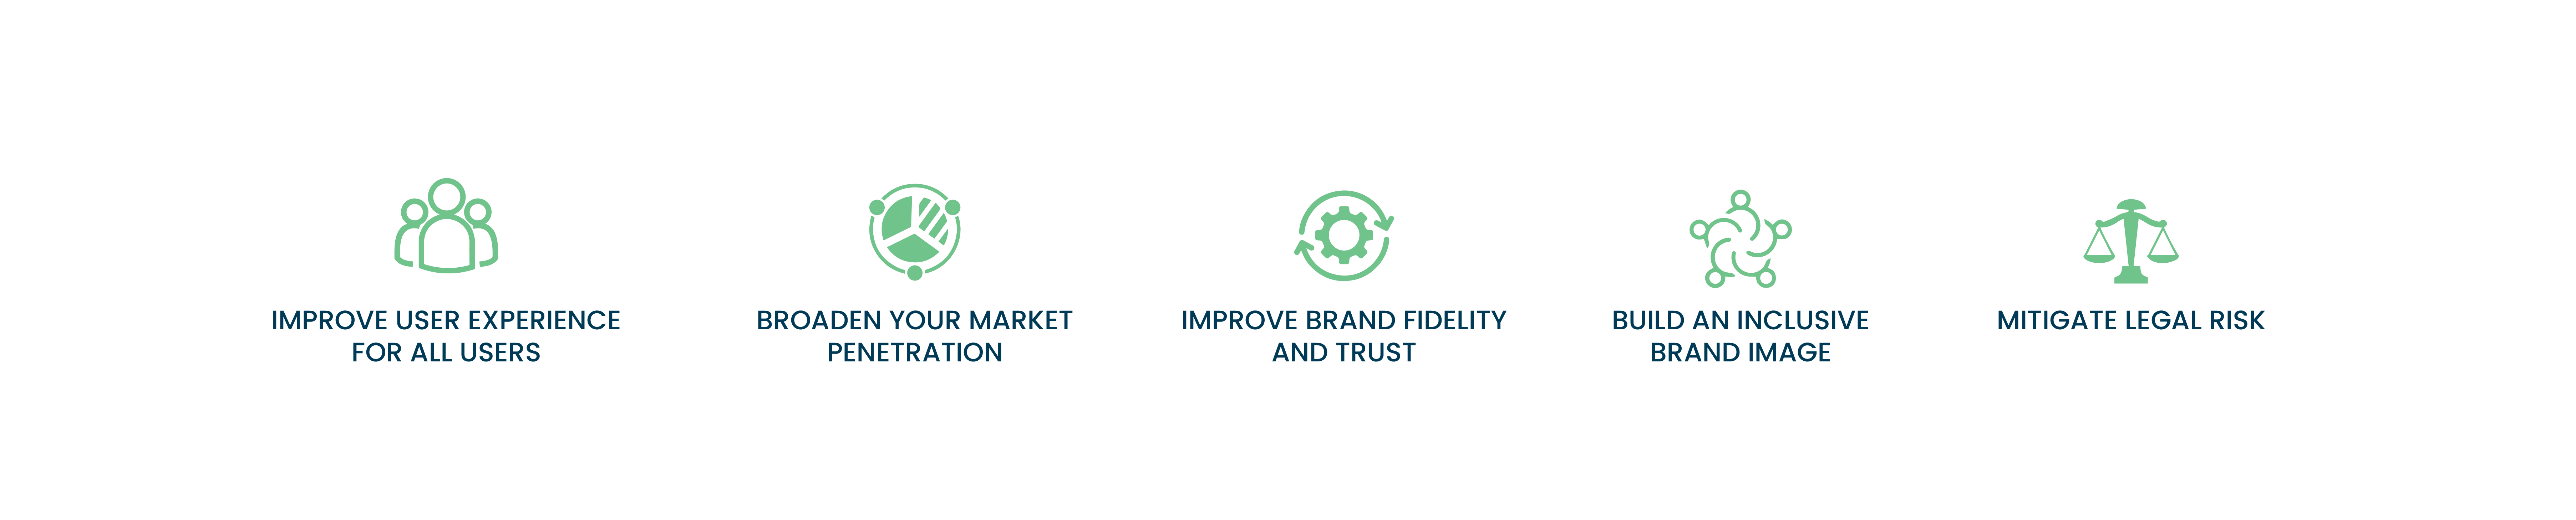 Improve user experience for all users; broaden your market penetration; improve brand fidelity and trust; build an inclusive brand image; mitigate legal risk